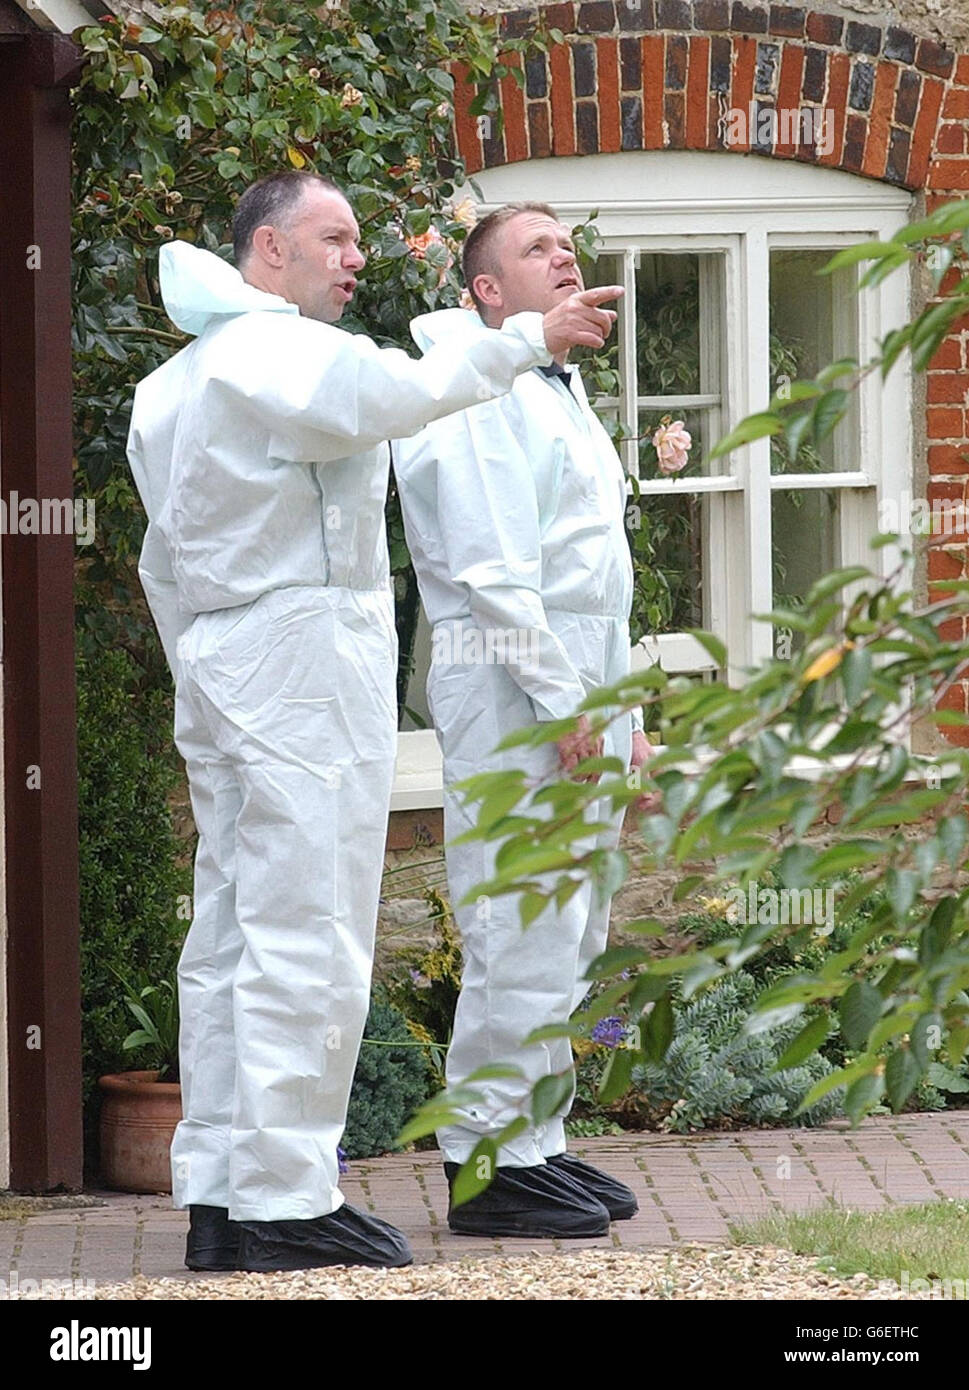 Police forensic officers conduct investigations at the home of Dr David Kelly in Southmoor, Oxfordshire. Earlier two women, believed to be Dr Kelly's wife Janice and one of his three daughters, were driven away from their house in a police vehicle with darkened windows. It is thought police were taking them to the John Radcliffe Hospital in Oxford to formally identify the scientist's body. Stock Photo